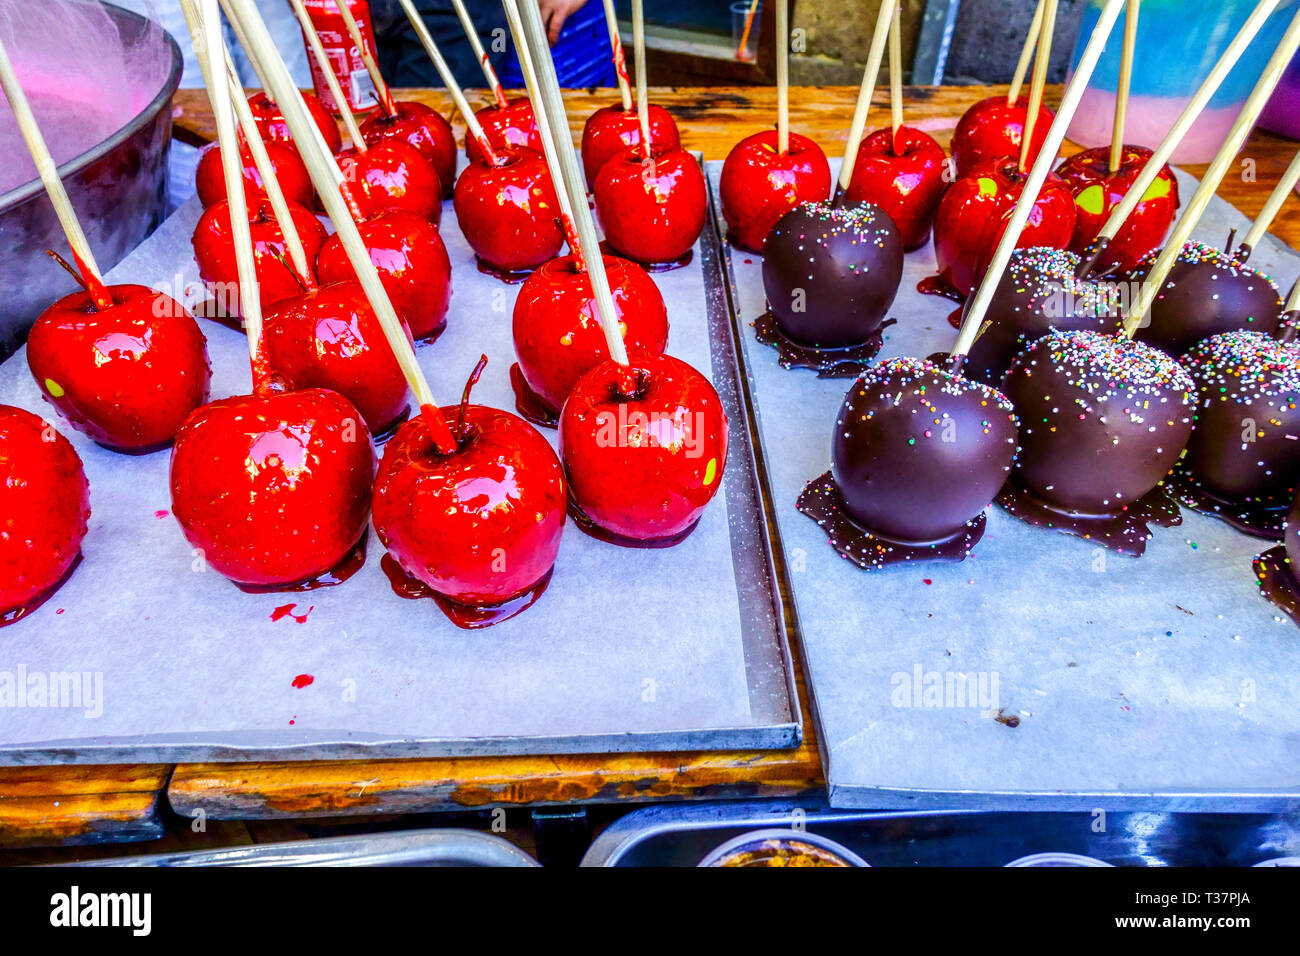 Chocolate apples on a stick, Valencian sweets sell on a street stall, caramel apples Stock Photo